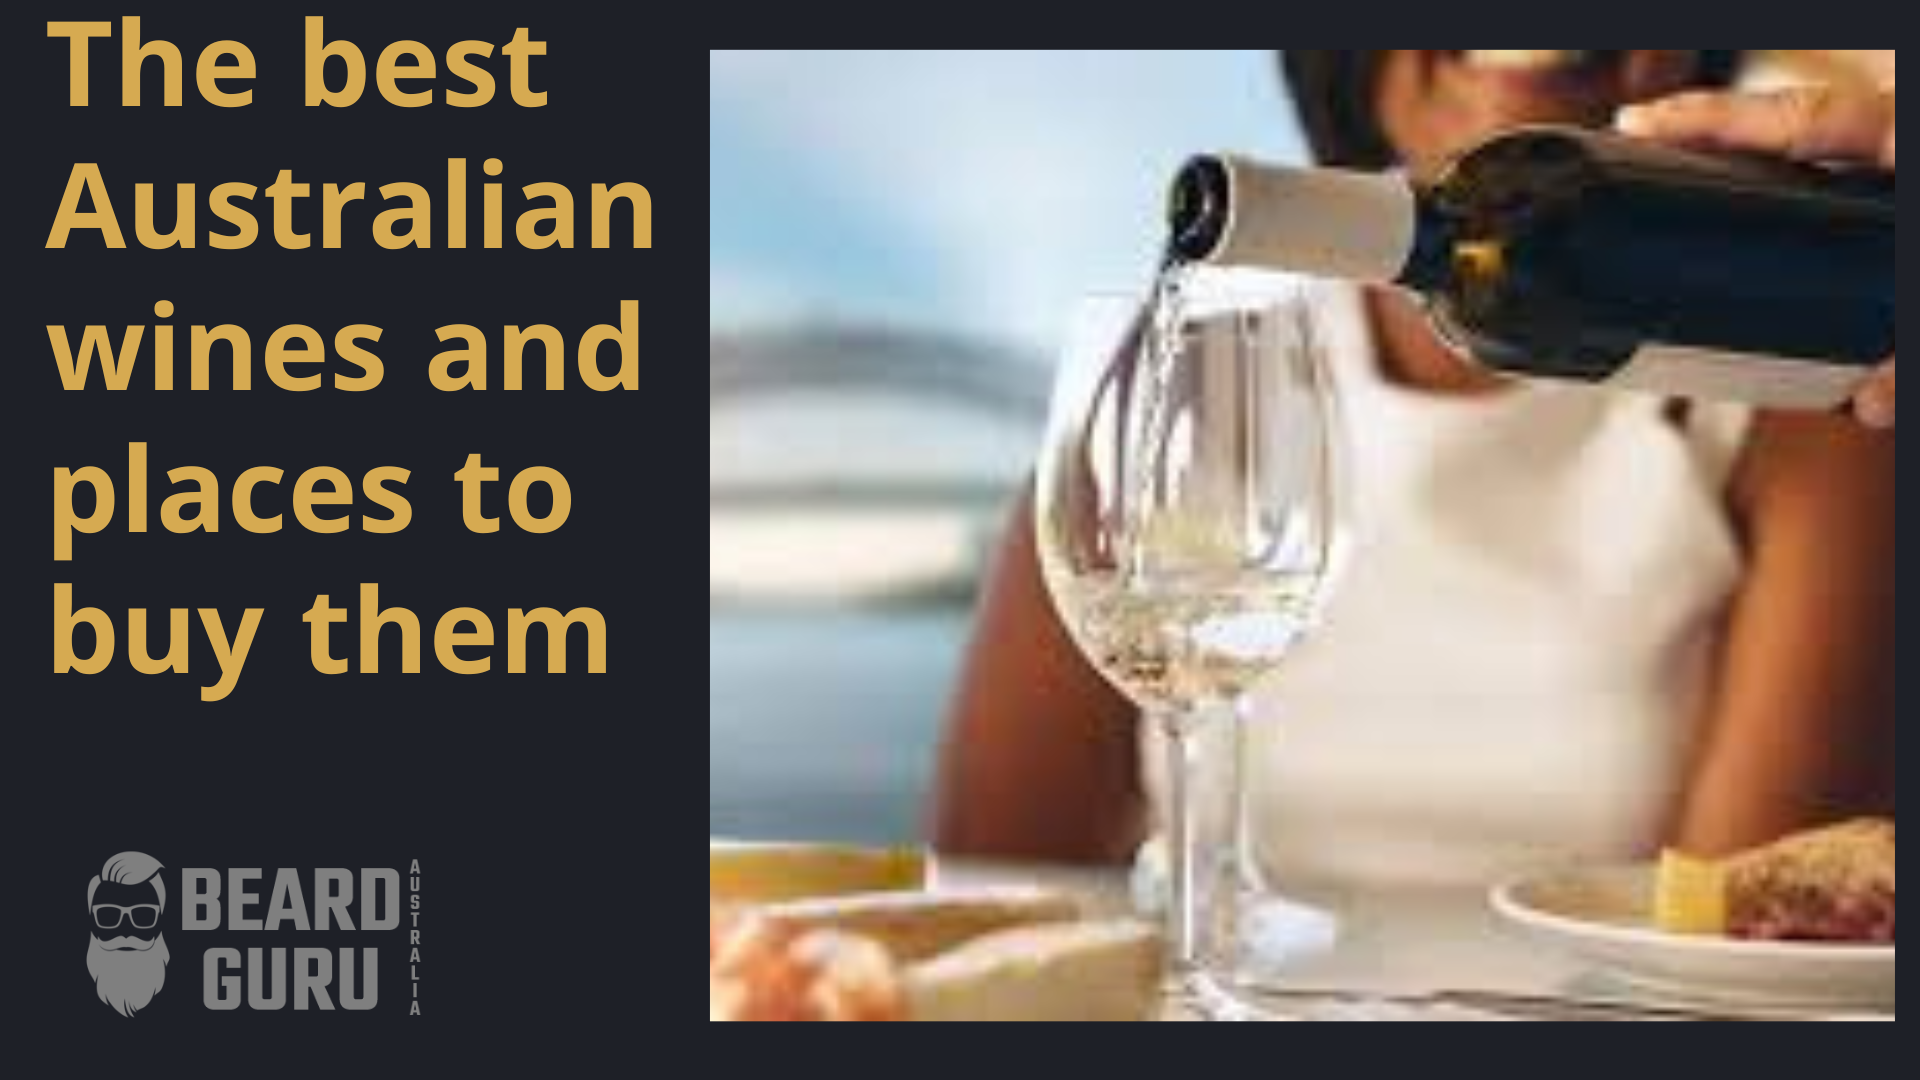 The best Australian wines and places to buy them